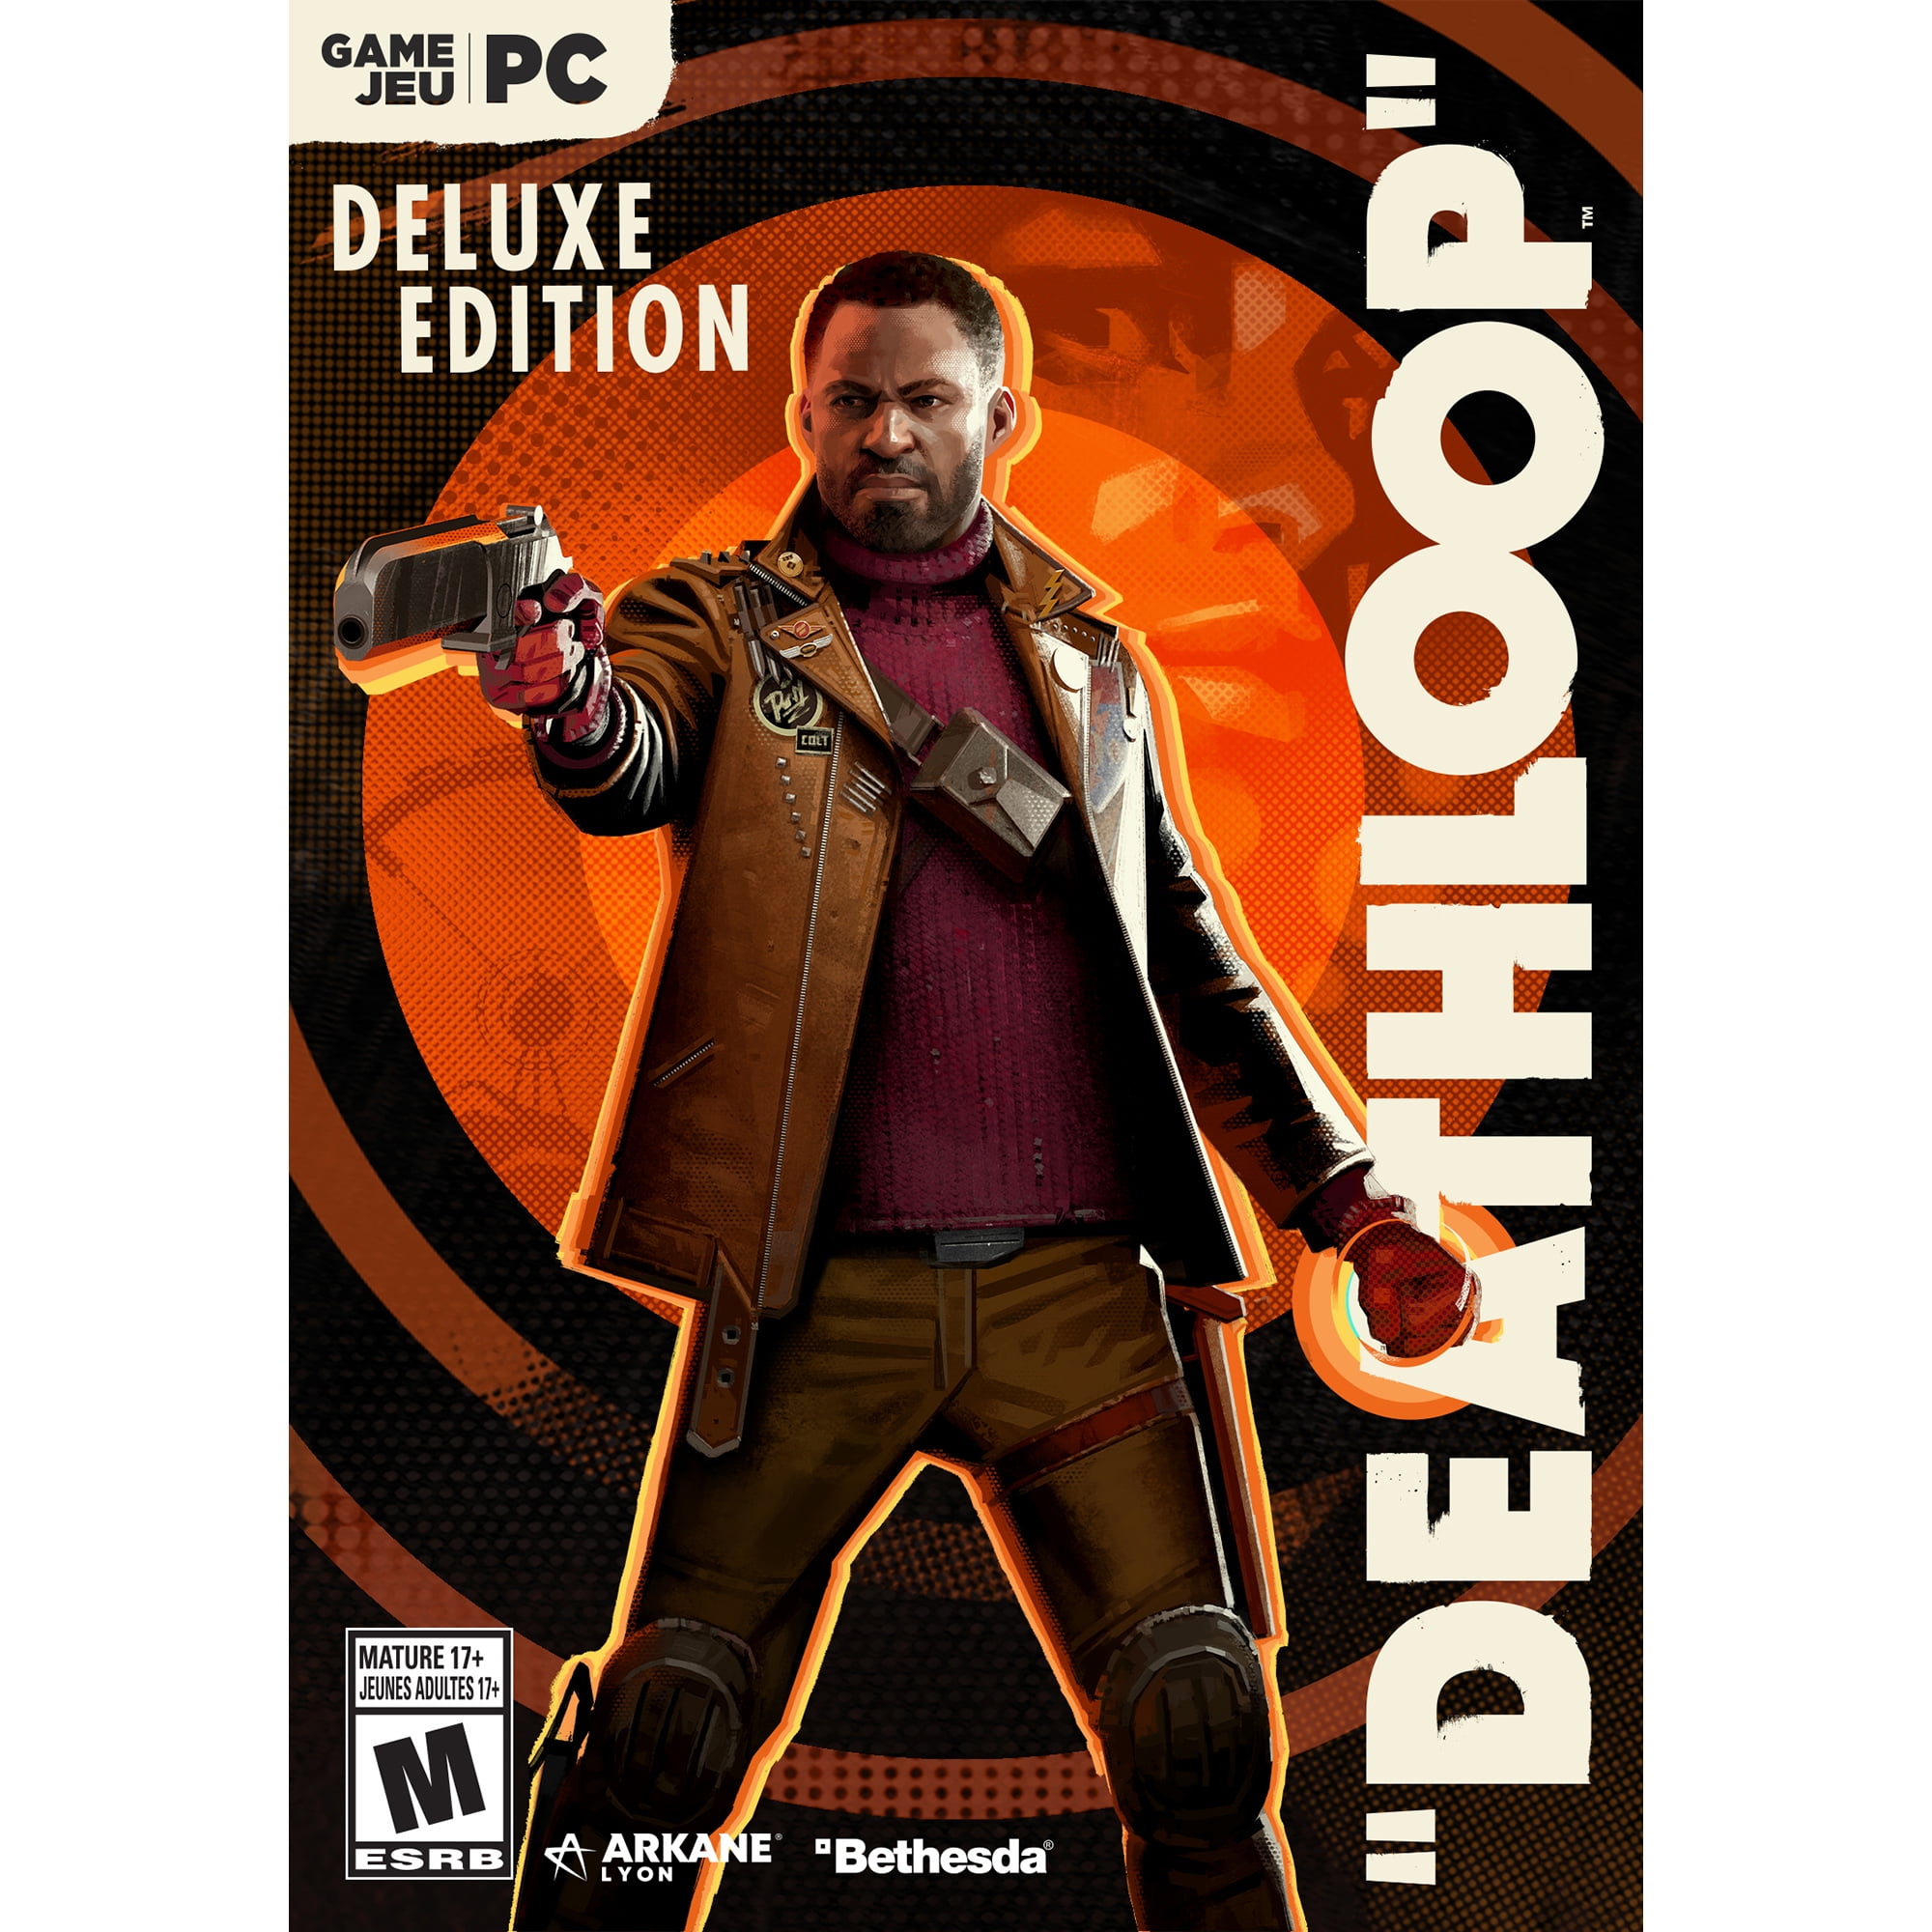 DEATHLOOP”, Official Website, First-Person Action from Arkane Lyon